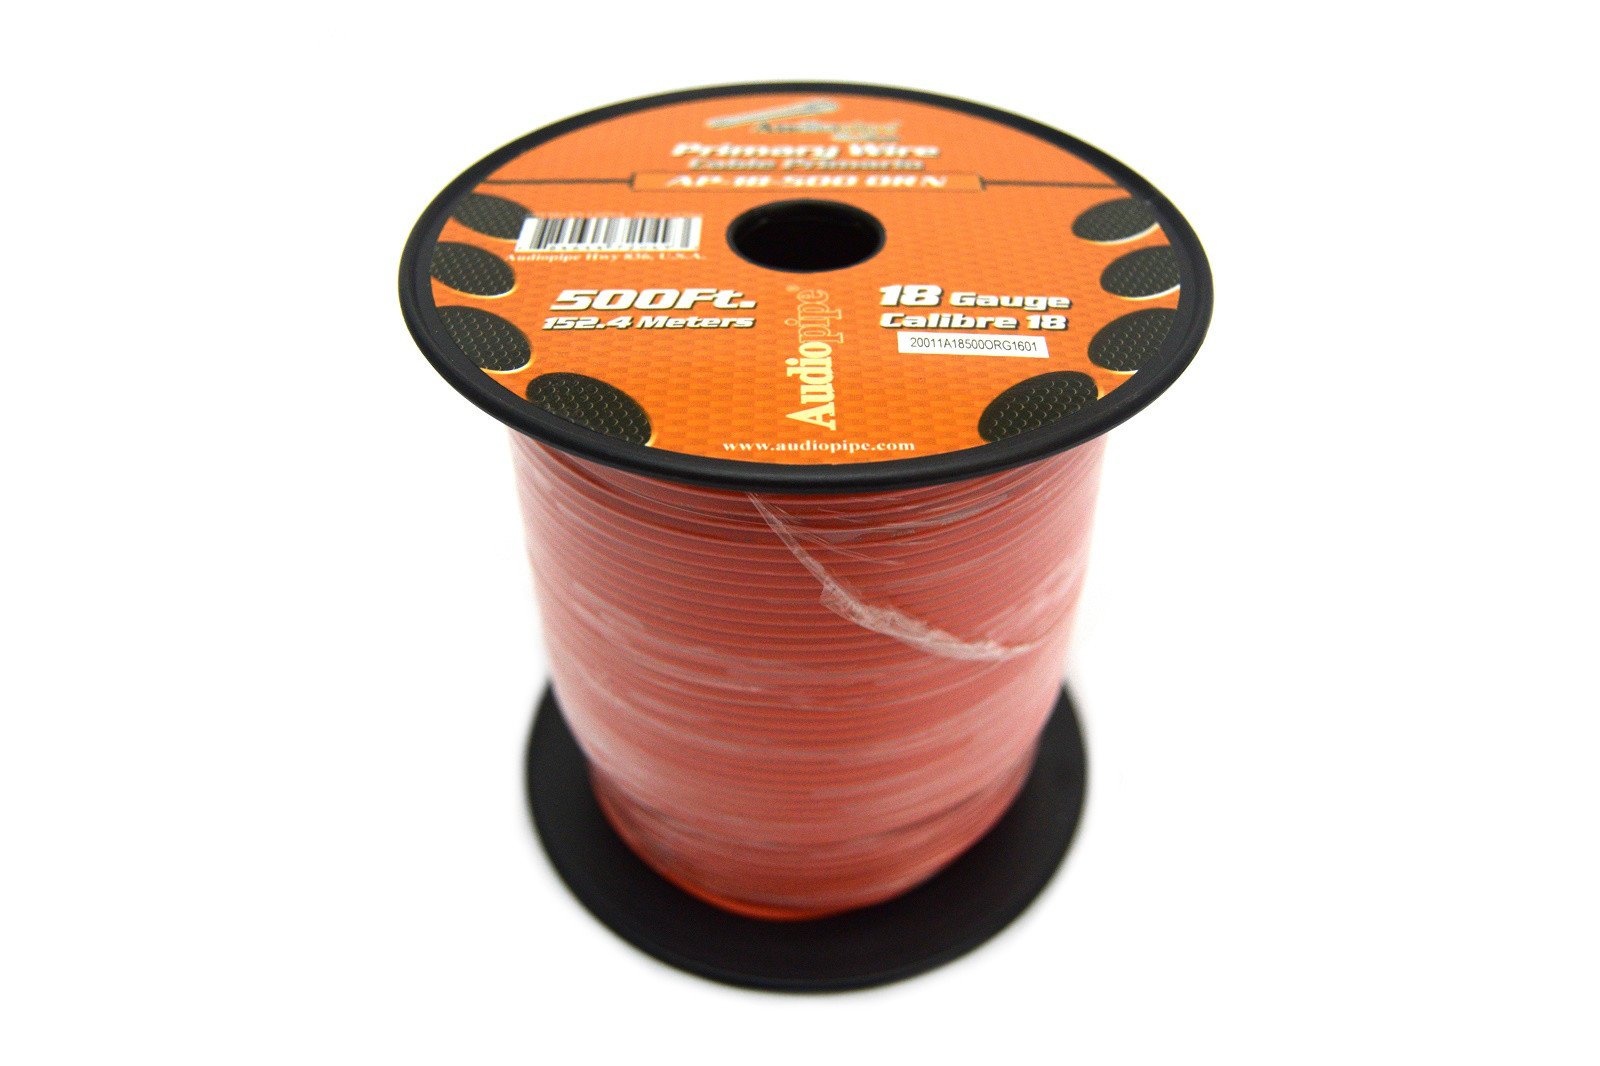 Best Connections 18 Gauge Car Audio Primary Wire (500ft–Orange)– Remote, Power/Ground Electrical